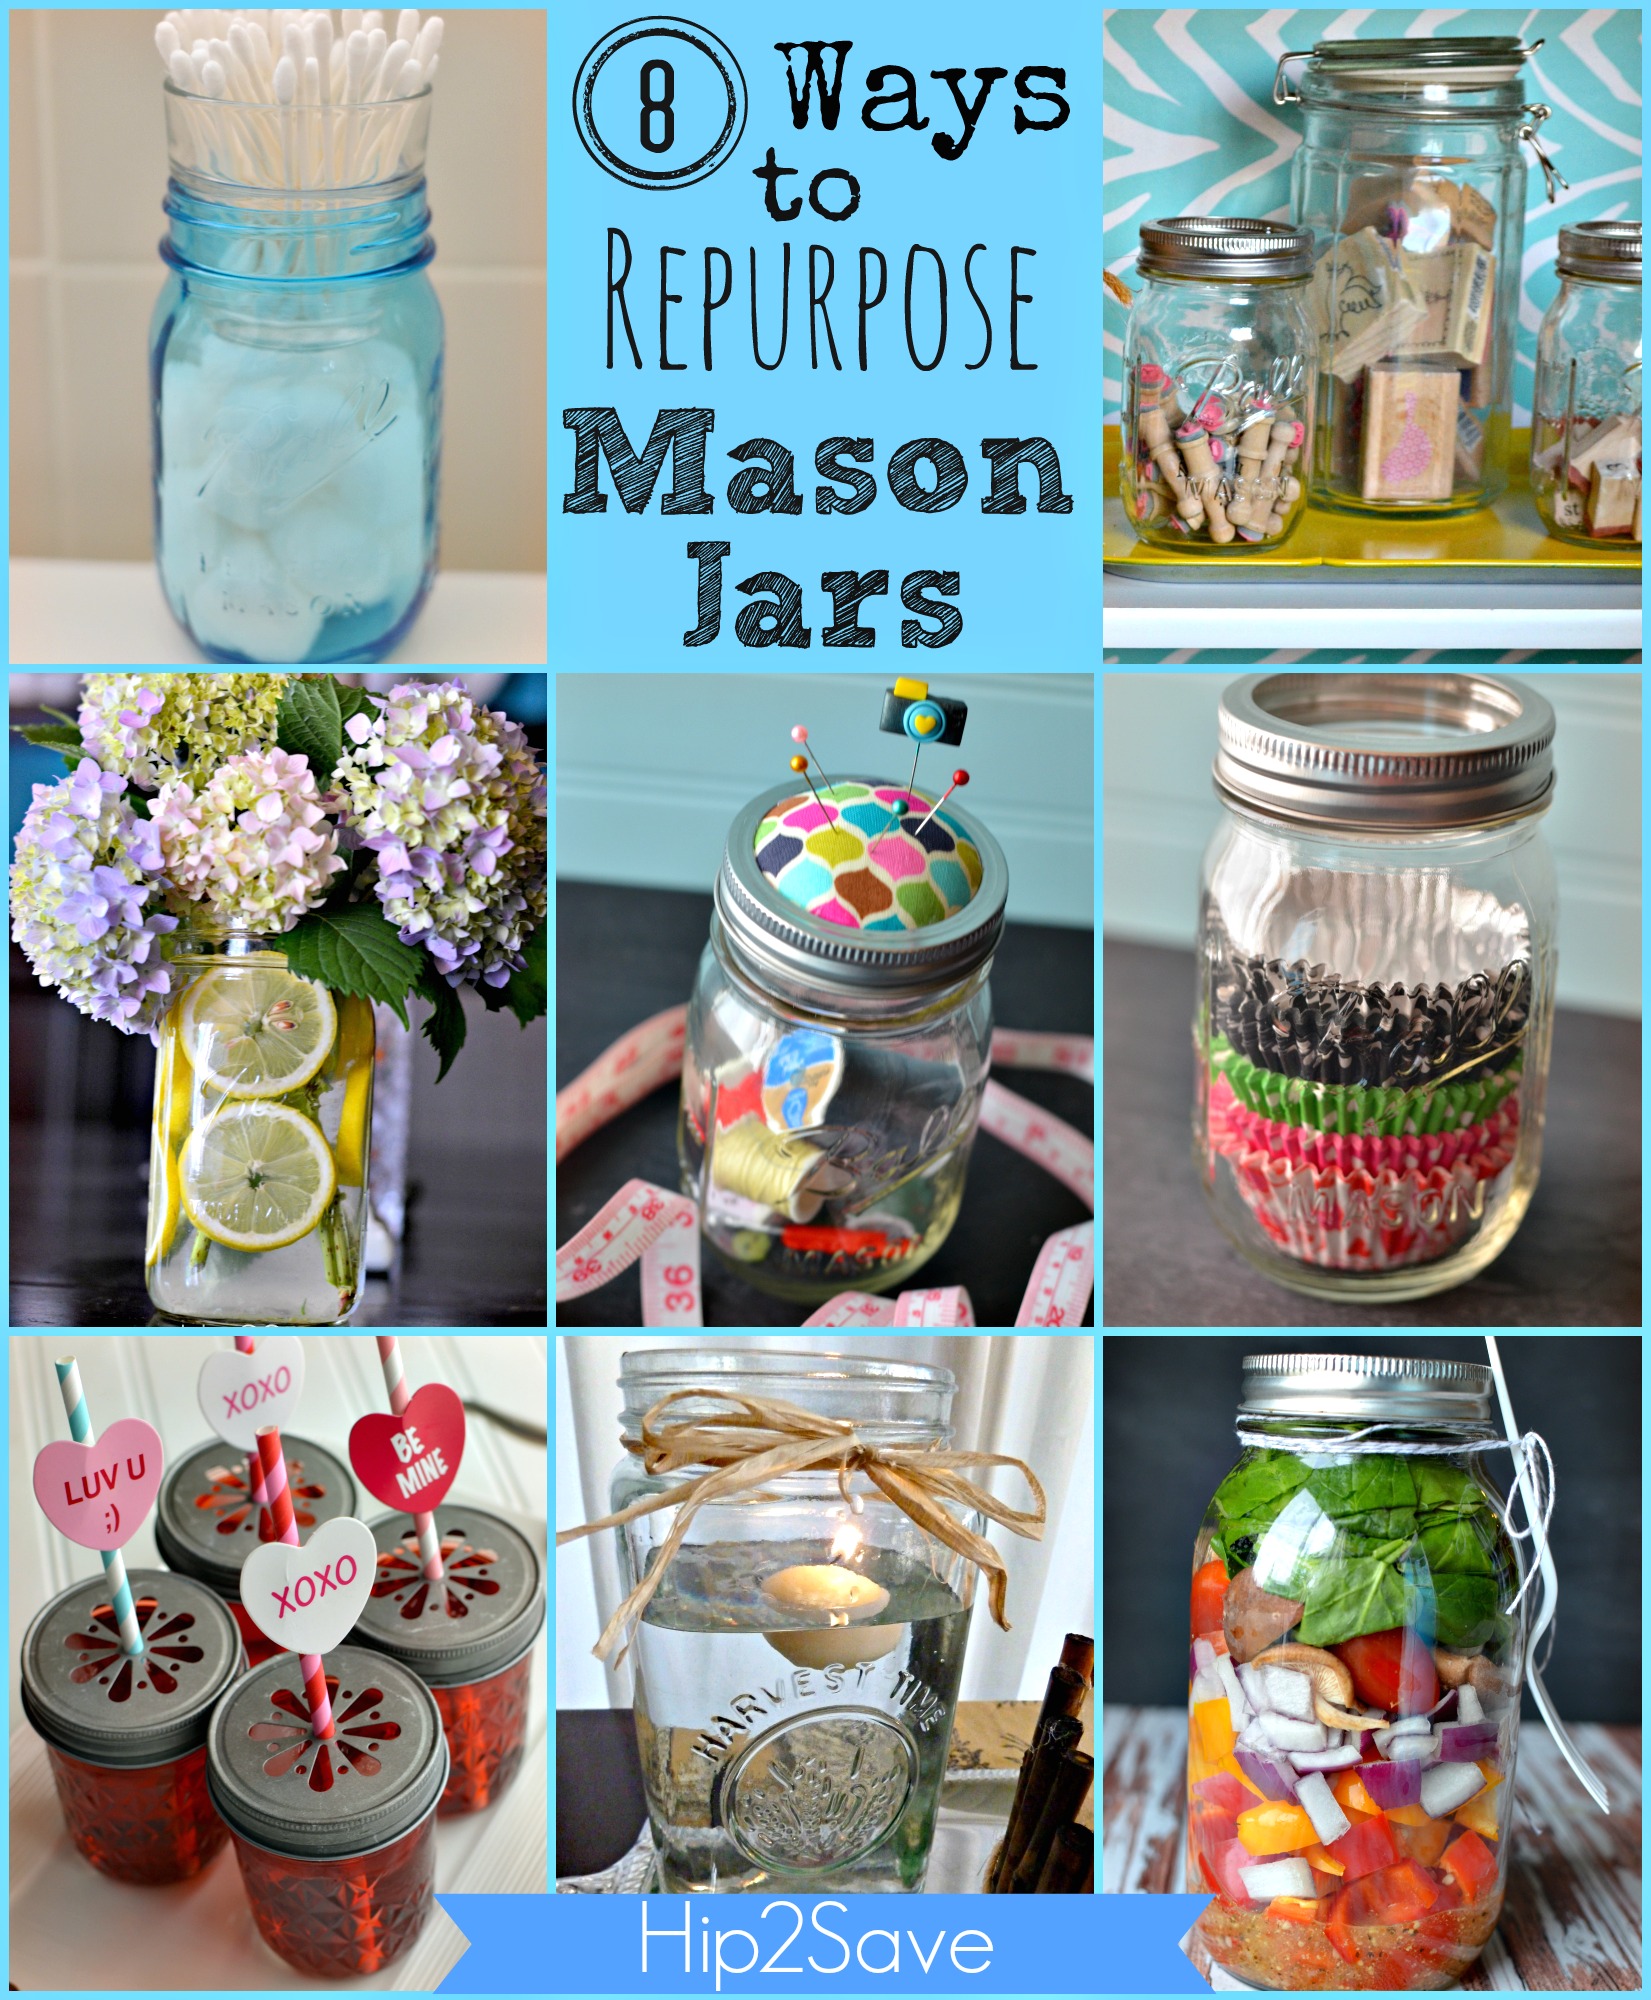 13 Unique Ways to Use Mason Jars in Your Home